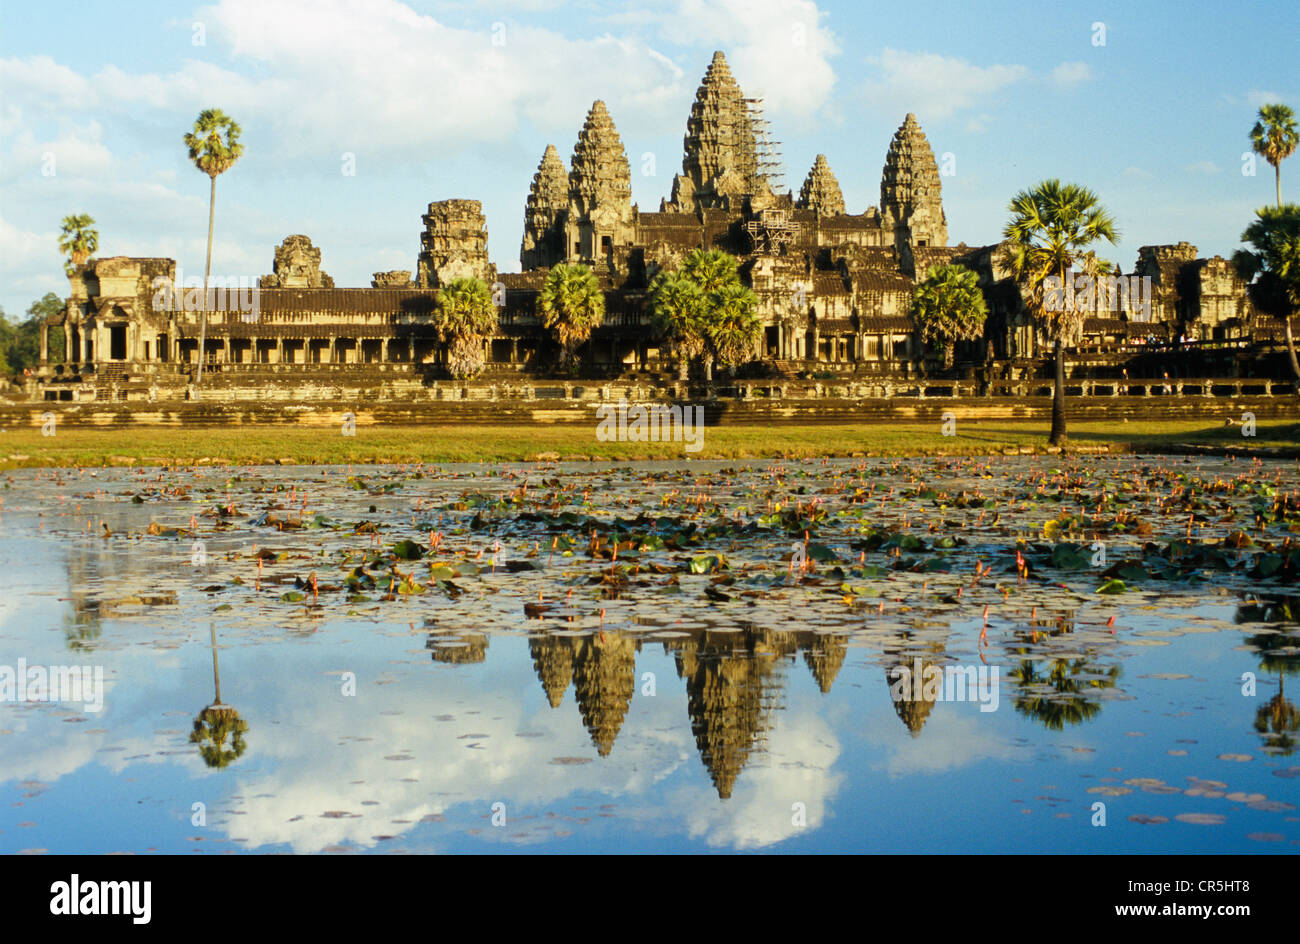 Angkor Wat, reflected in the lotos lake, Siem Reap, Cambodia, Southeast Asia Stock Photo